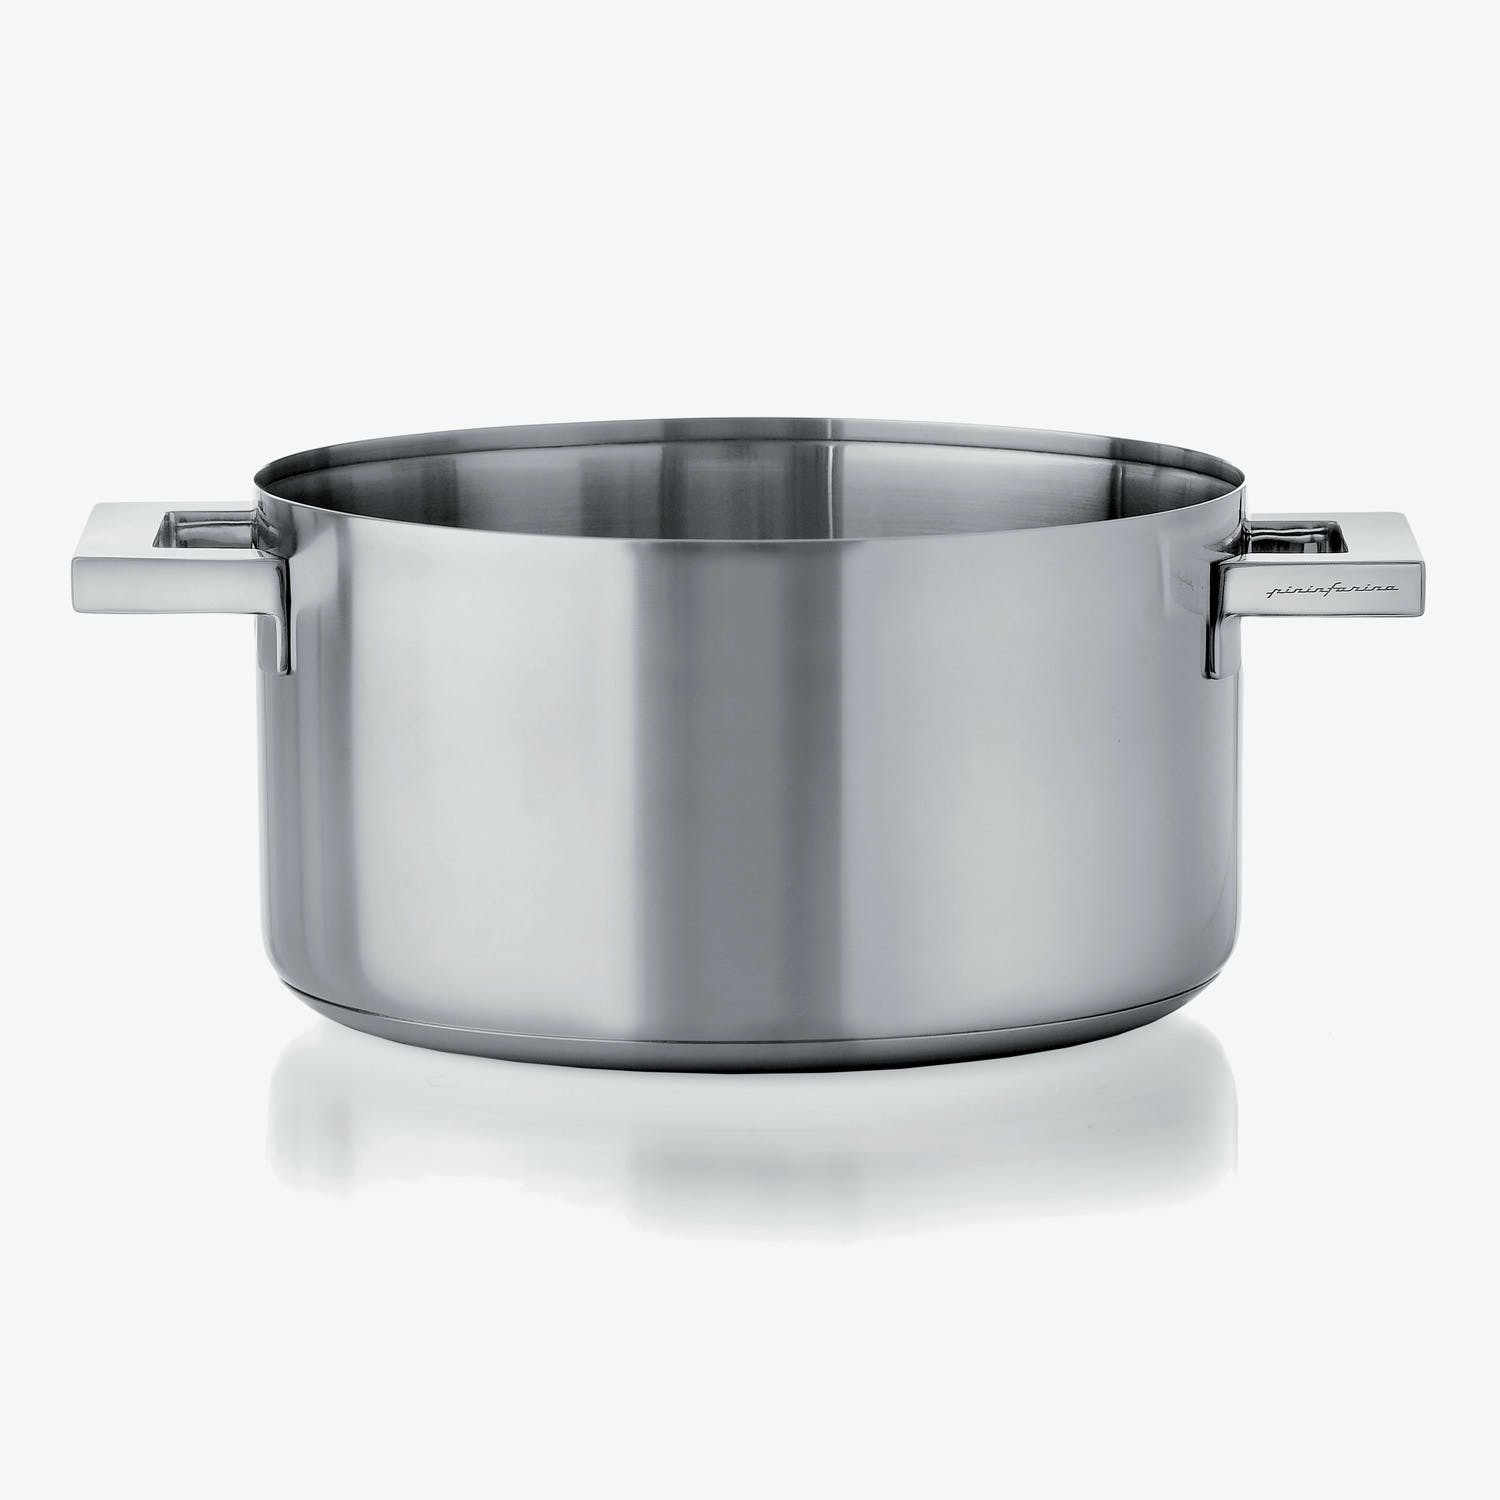 Sleek stainless steel cooking pot with squared handles for easy grip.